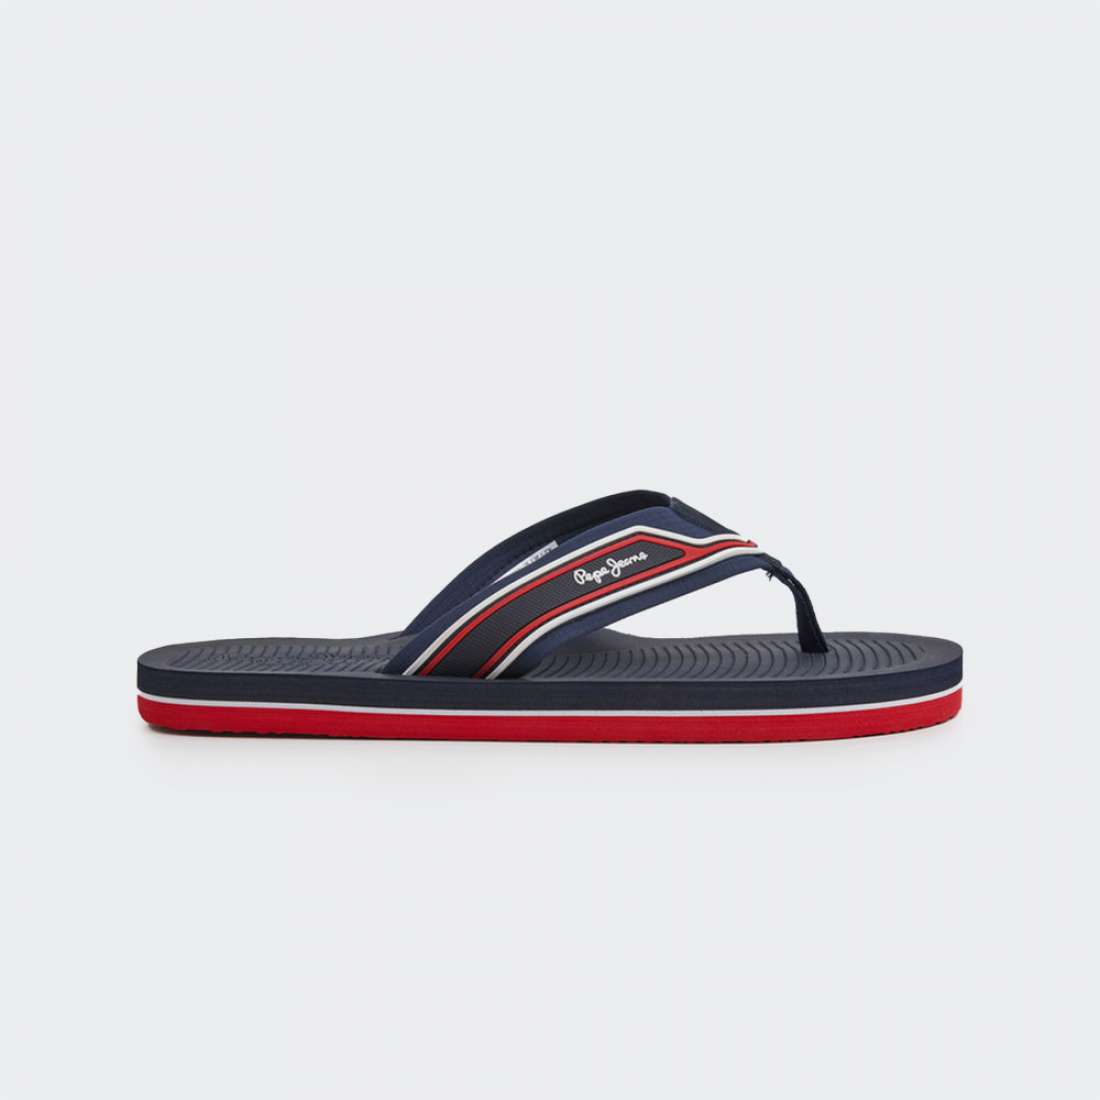 CHINELOS PEPE JEANS SOUTH BEACH 2.0 NAVY